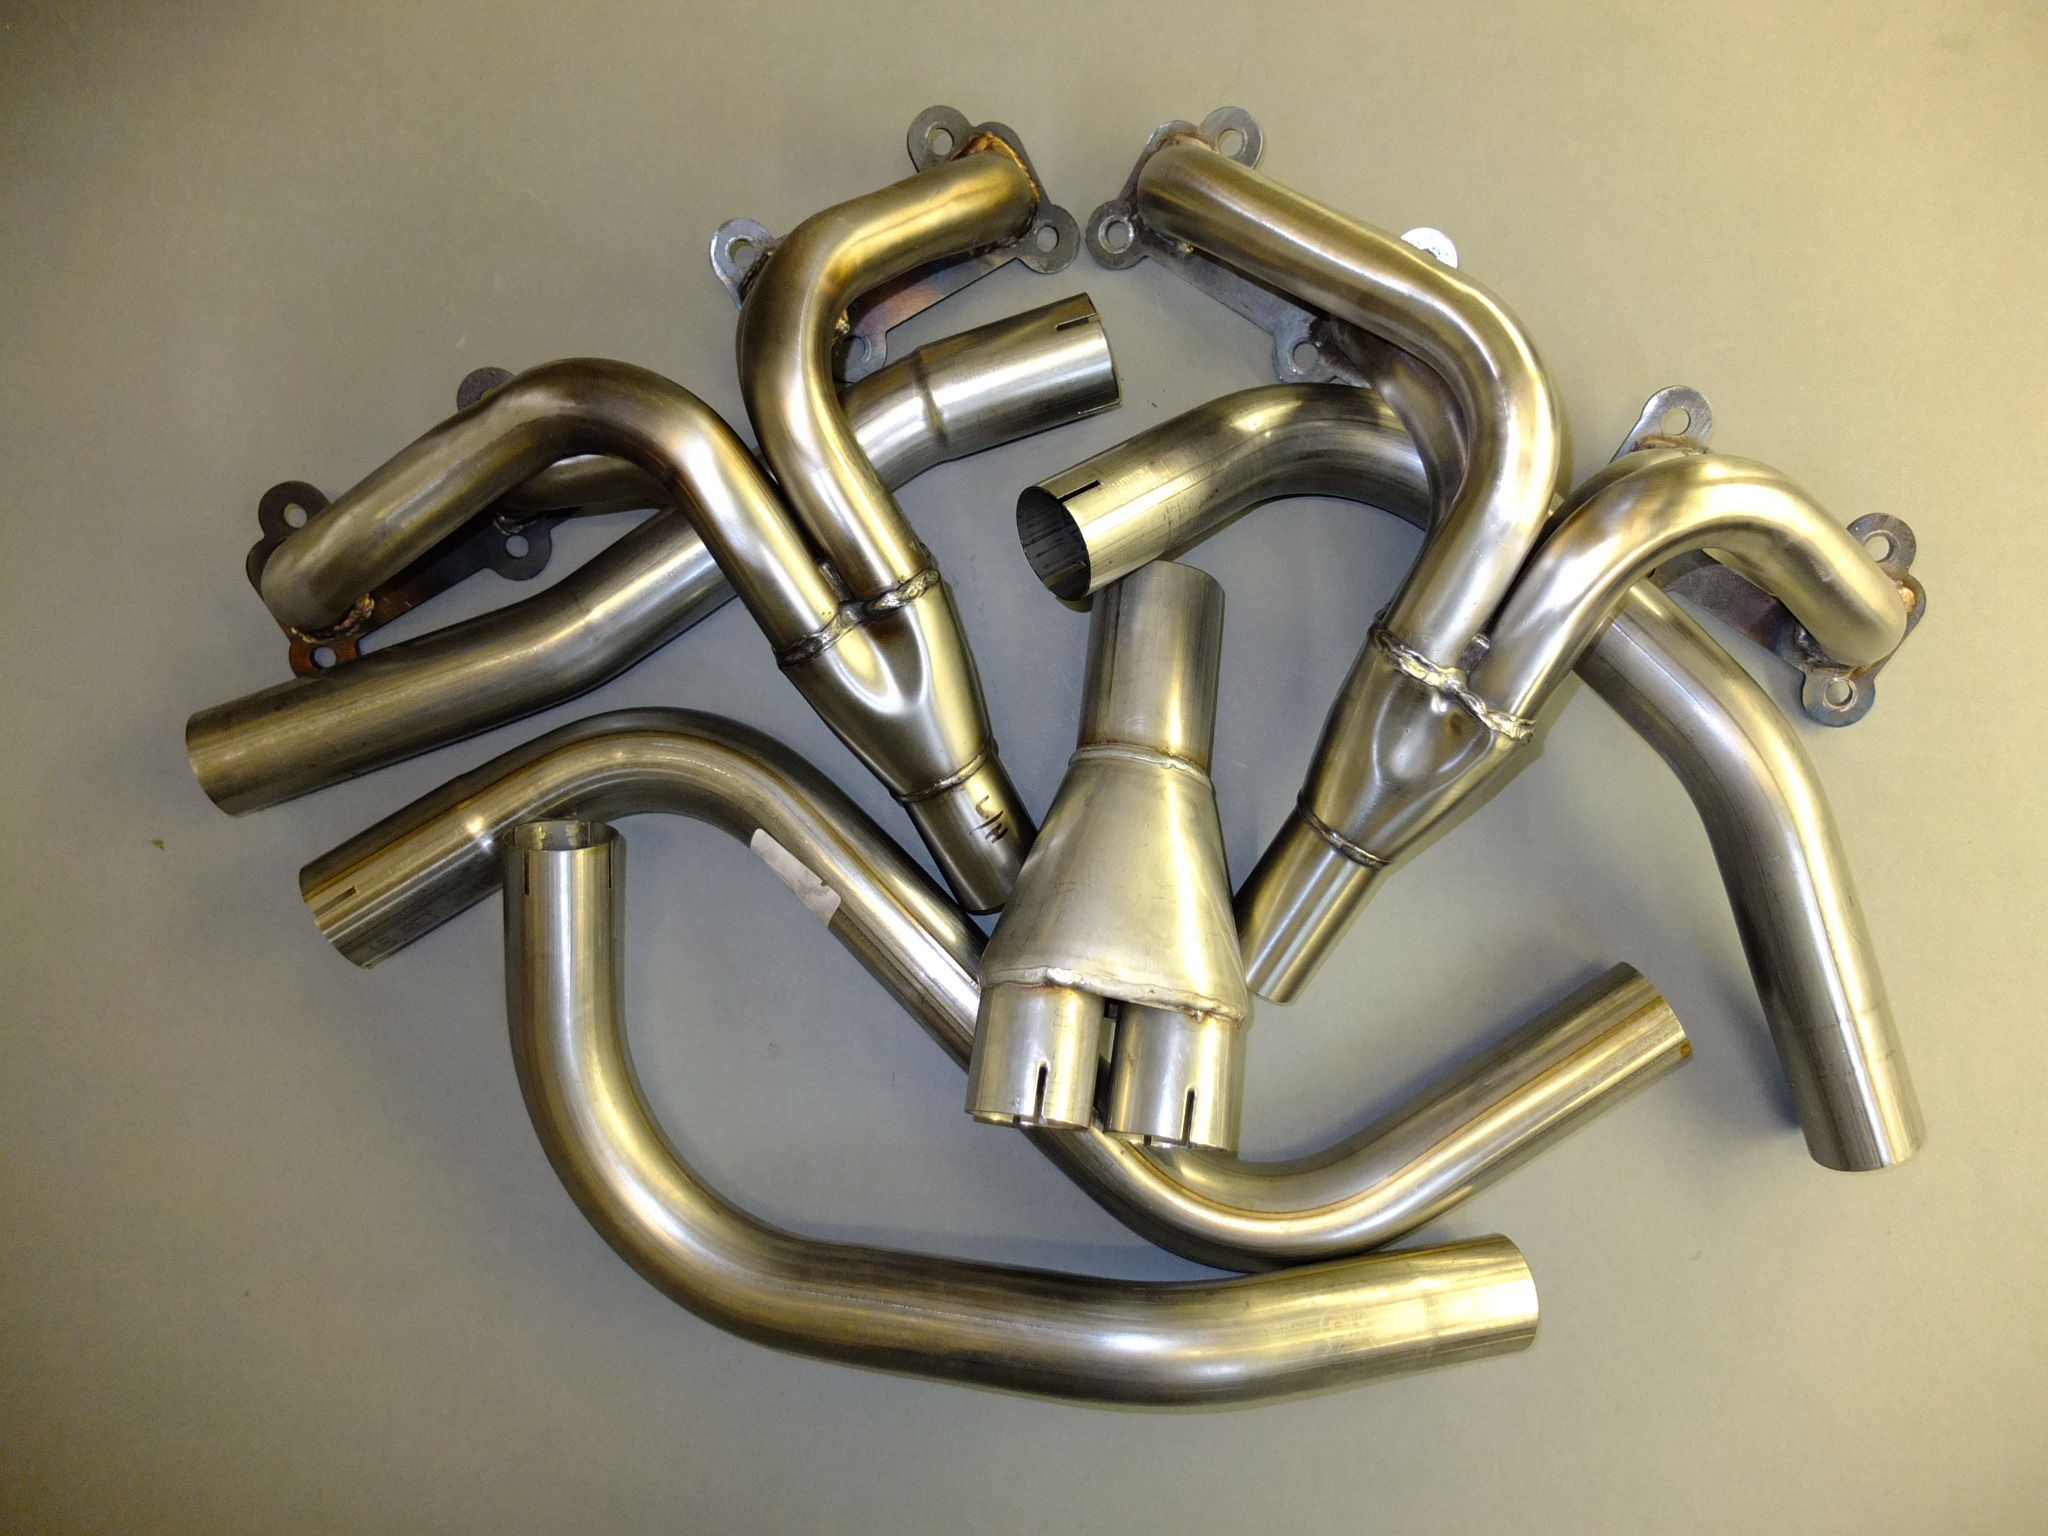 Rv8 Exhaust Manifolds Ssteel Mg V8 And Mg Rv8 Car Parts